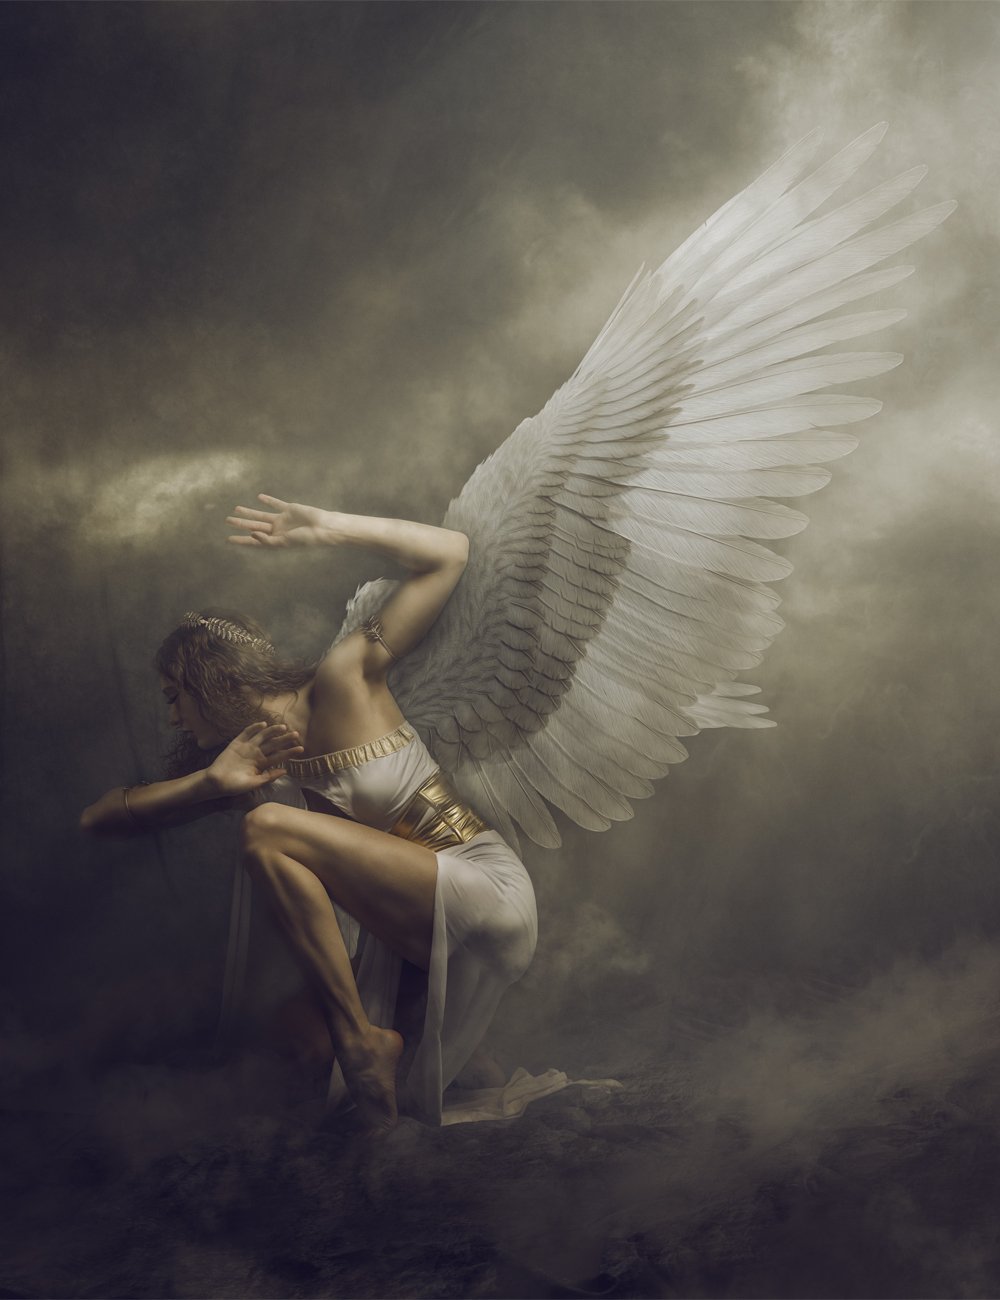 Descended Angel Video Course: Digital Compositing with Daz Studio and Photoshop